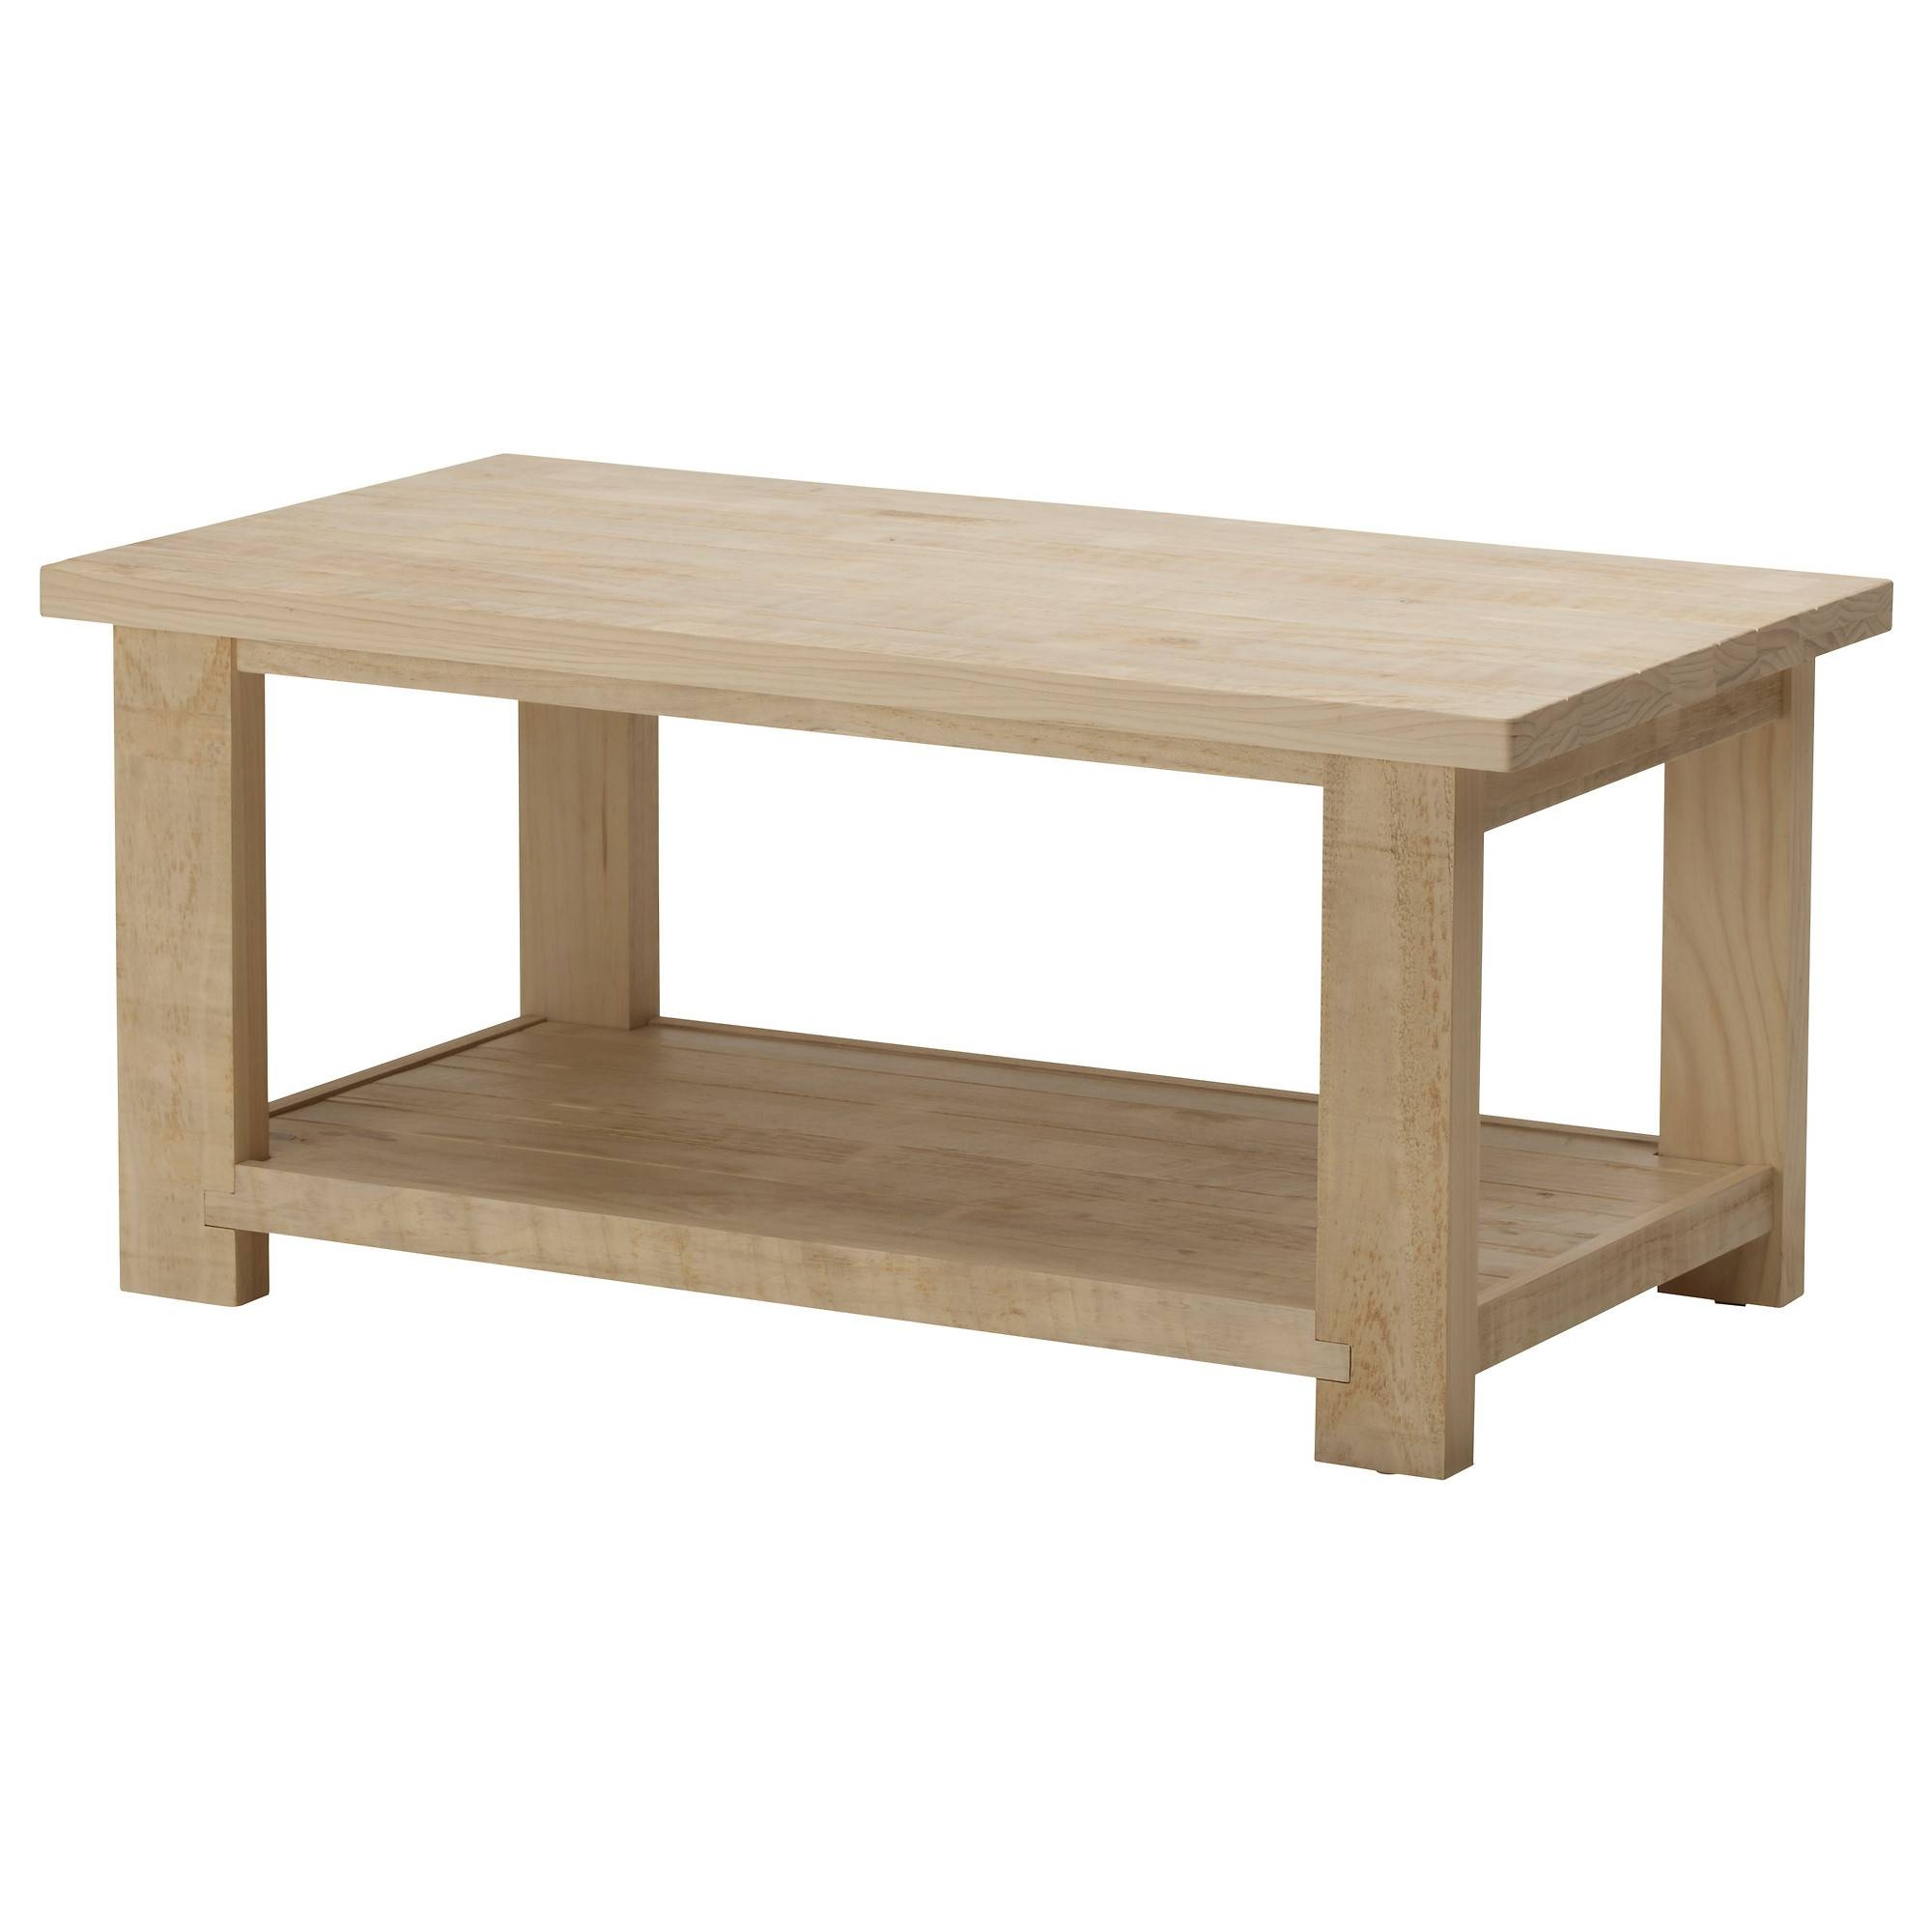 Well Liked Low Height Coffee Table Nz57 Roccommunity pertaining to measurements 2000 X 2000